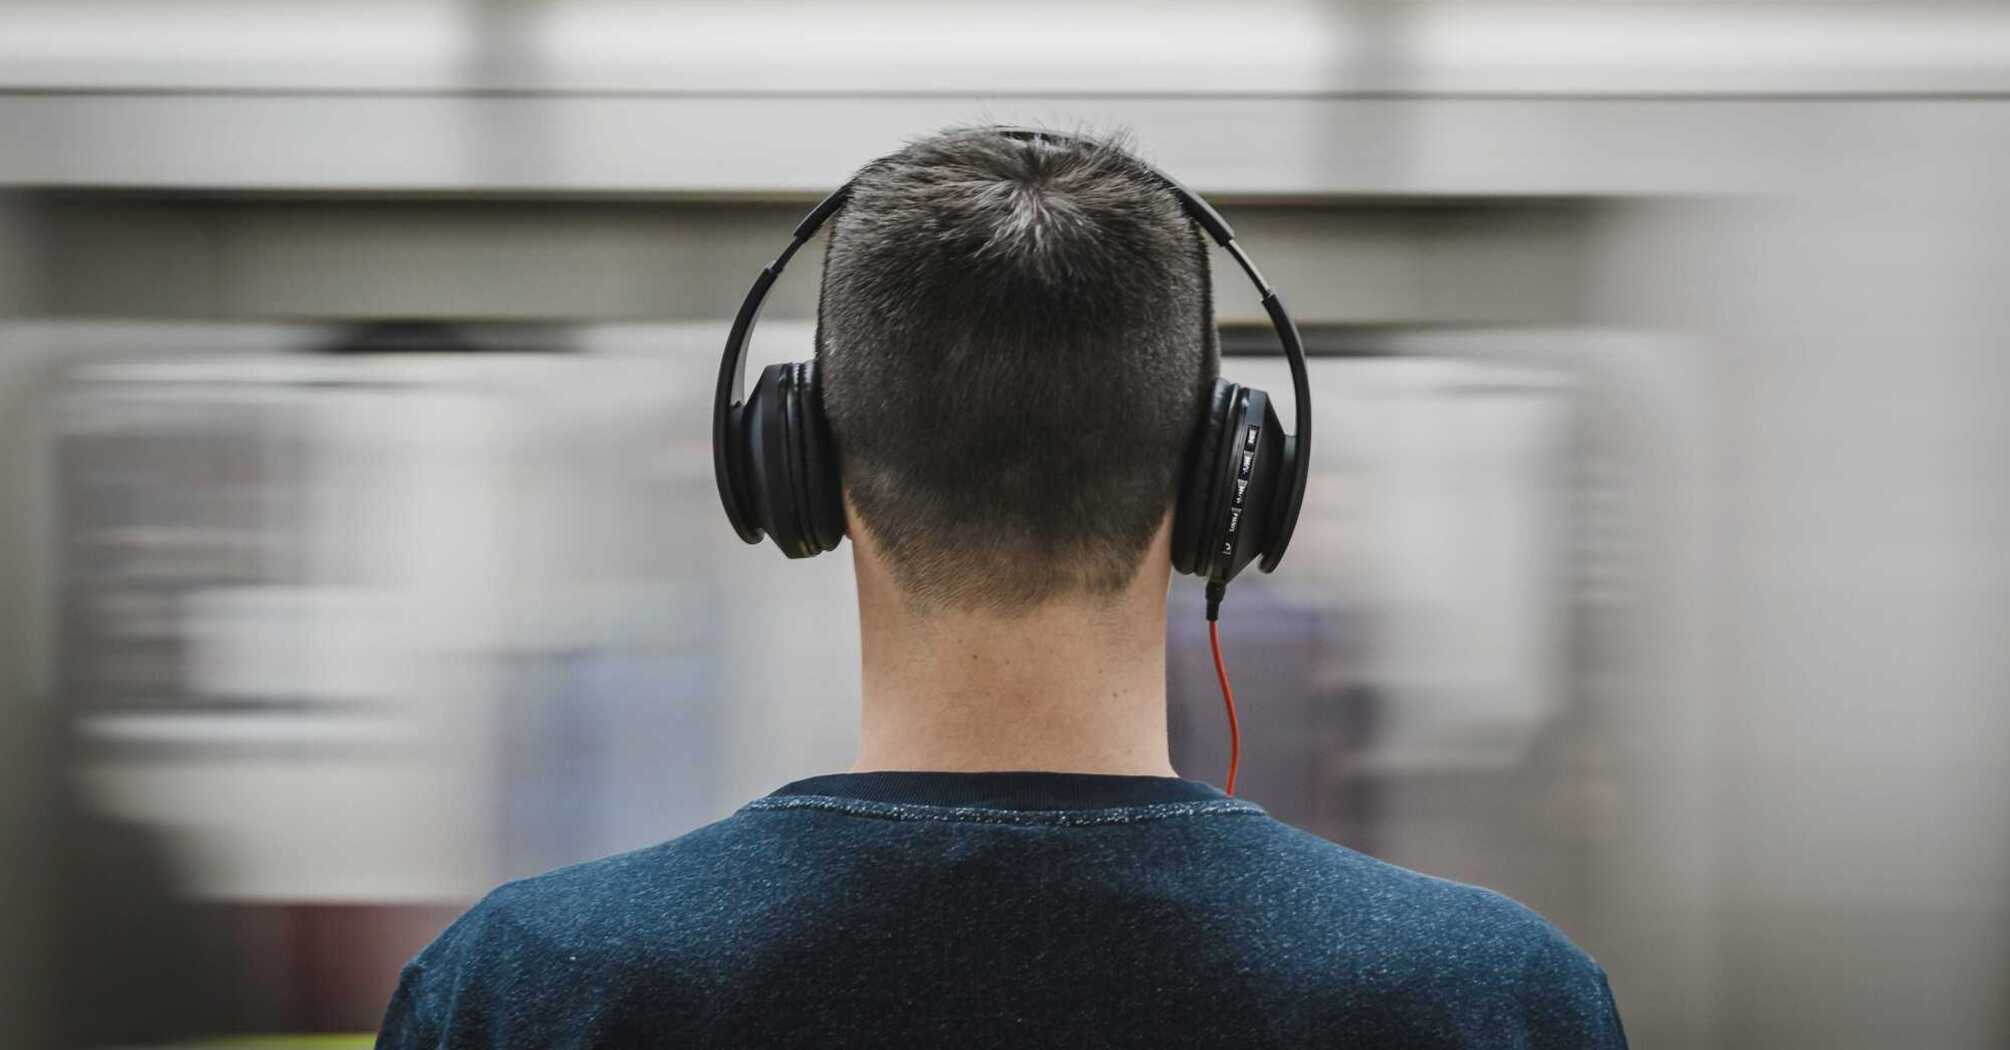 How noise cancellation works in headphones